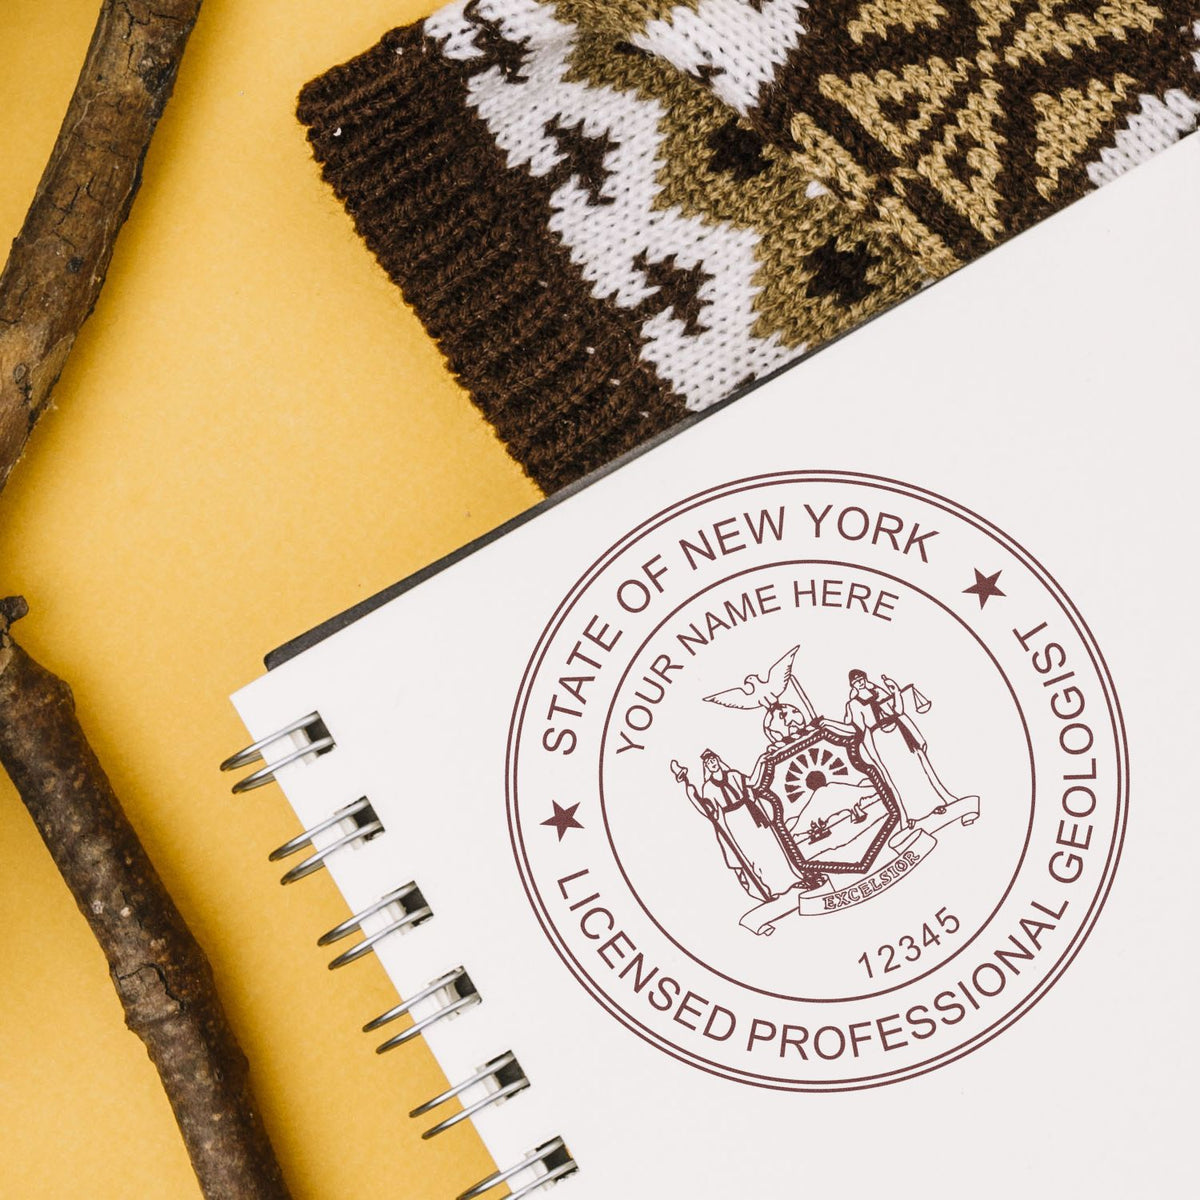 The Self-Inking New York Geologist Stamp stamp impression comes to life with a crisp, detailed image stamped on paper - showcasing true professional quality.